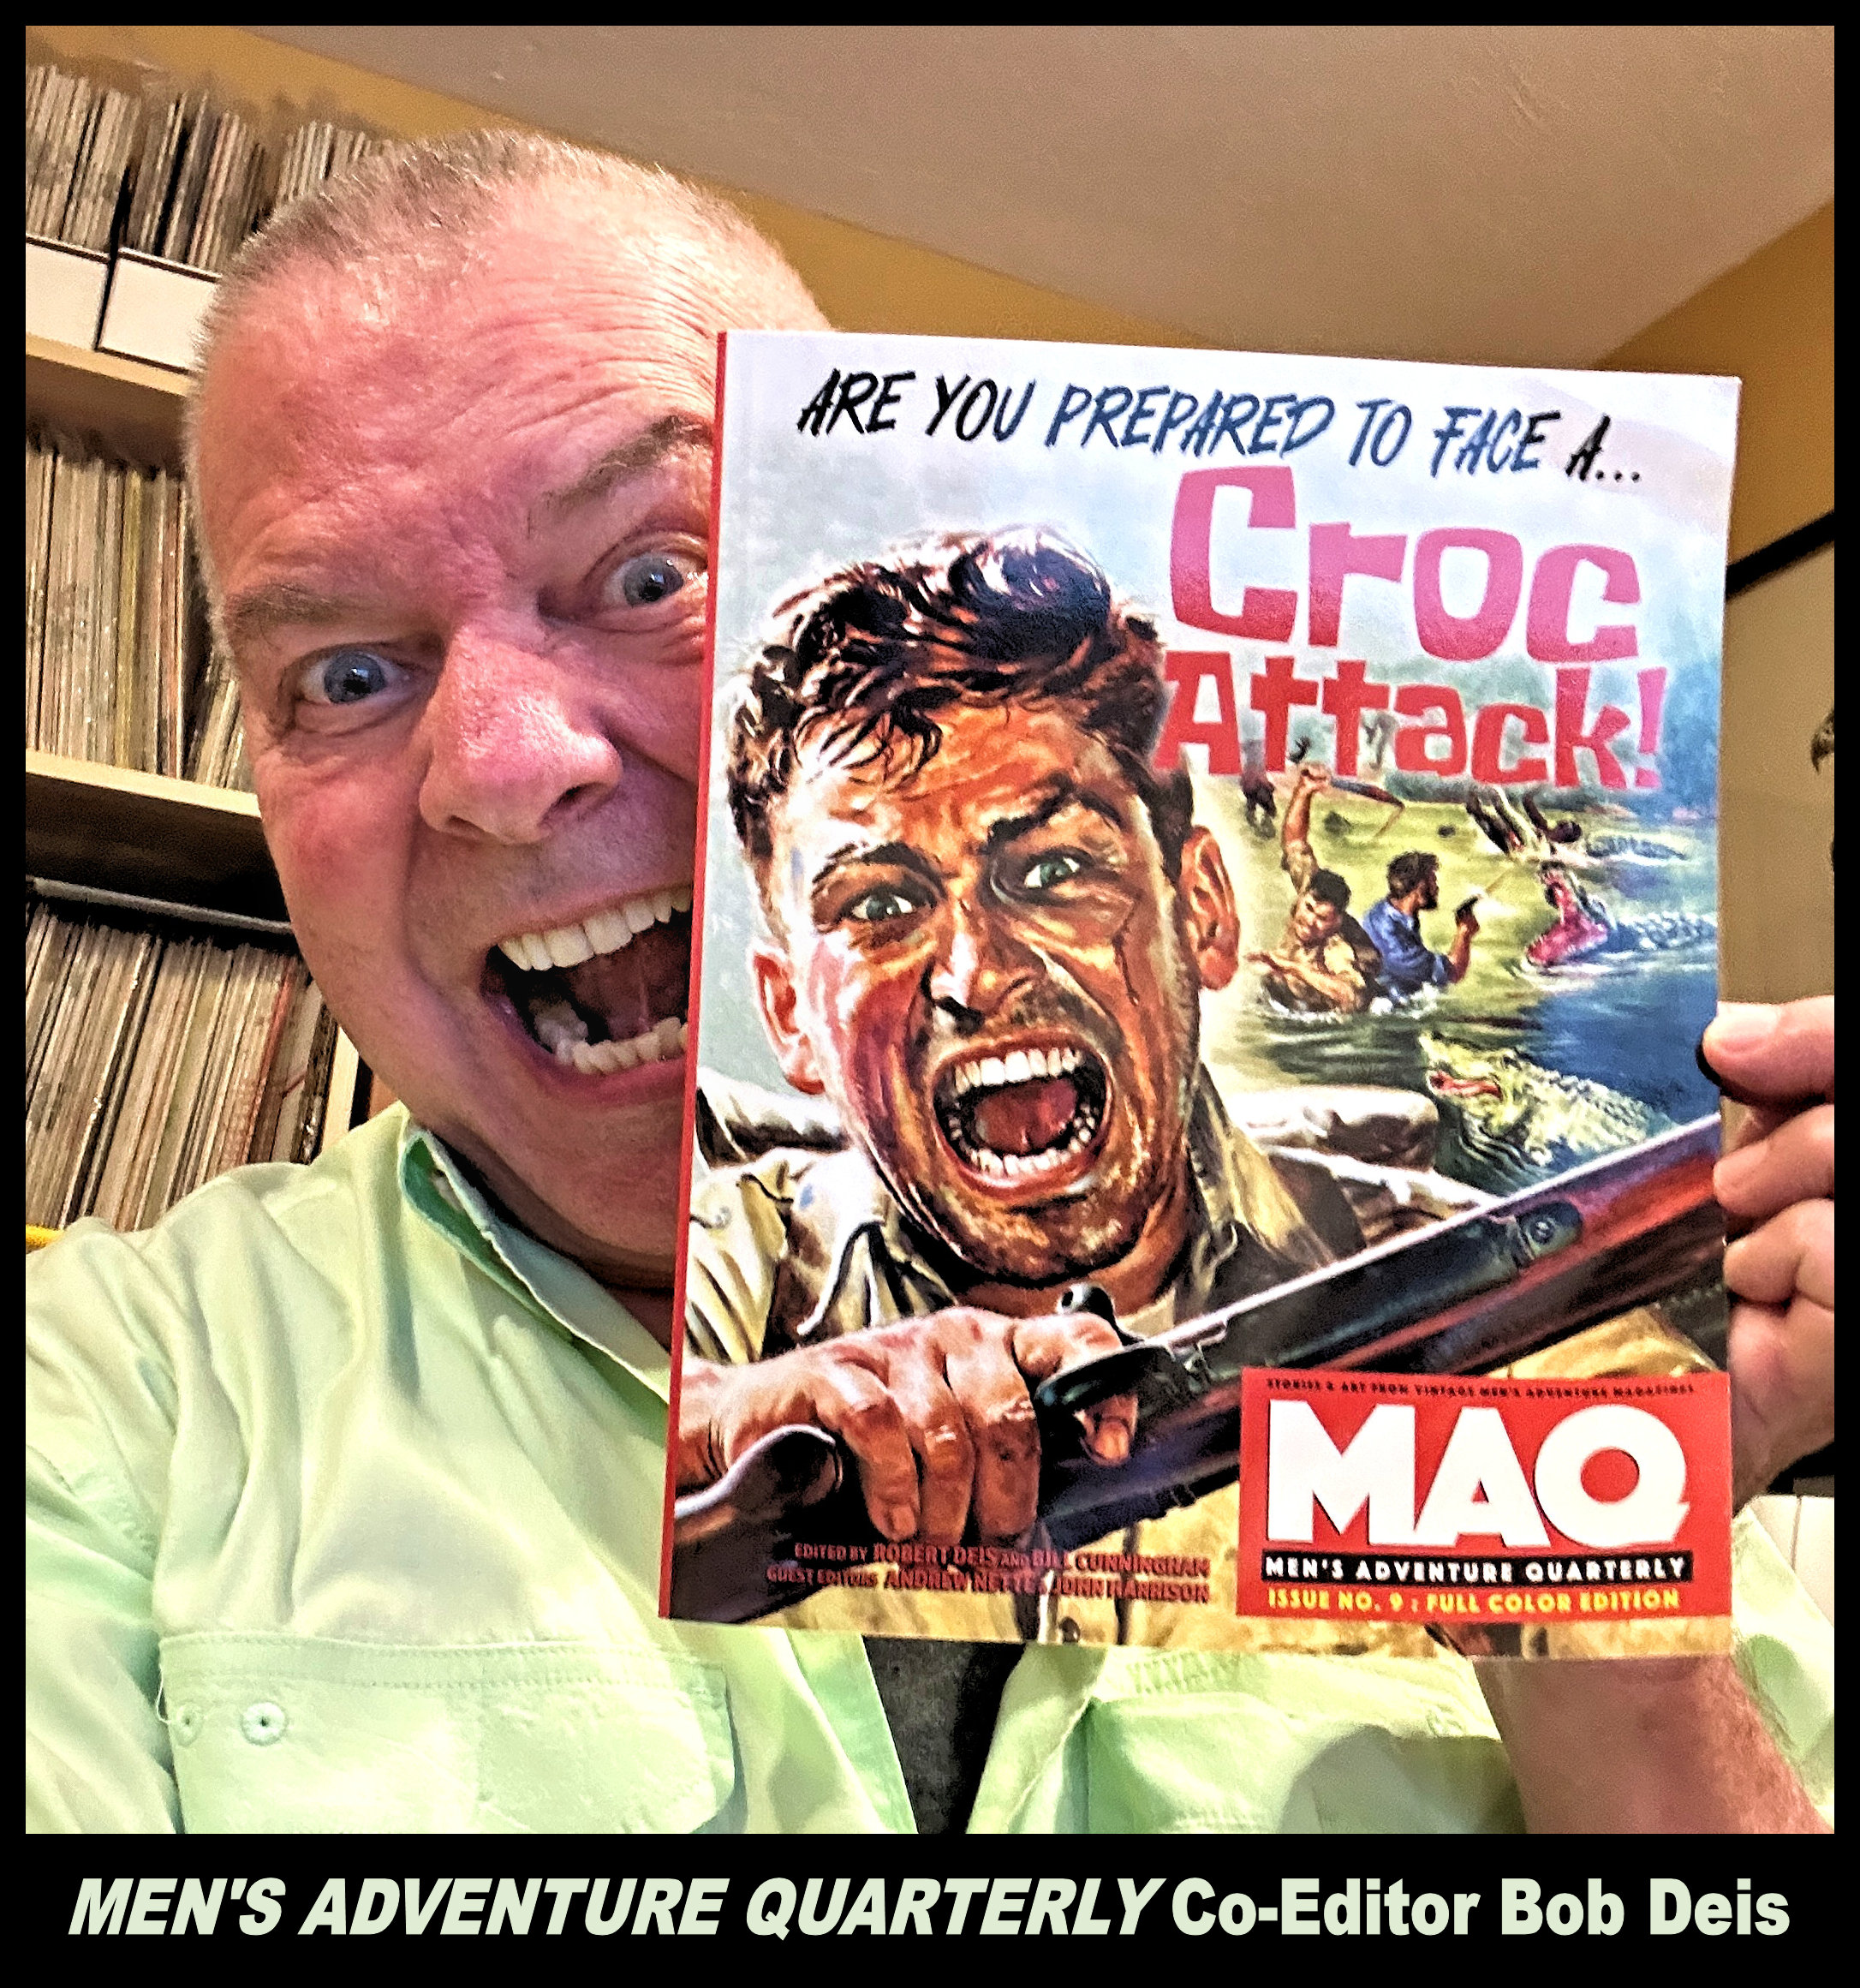 The MEN'S ADVENTURE QUARTERLY #9—the “Croc Attack” issue, Preview - Part 2  - The Men's Adventure Magazines Blog